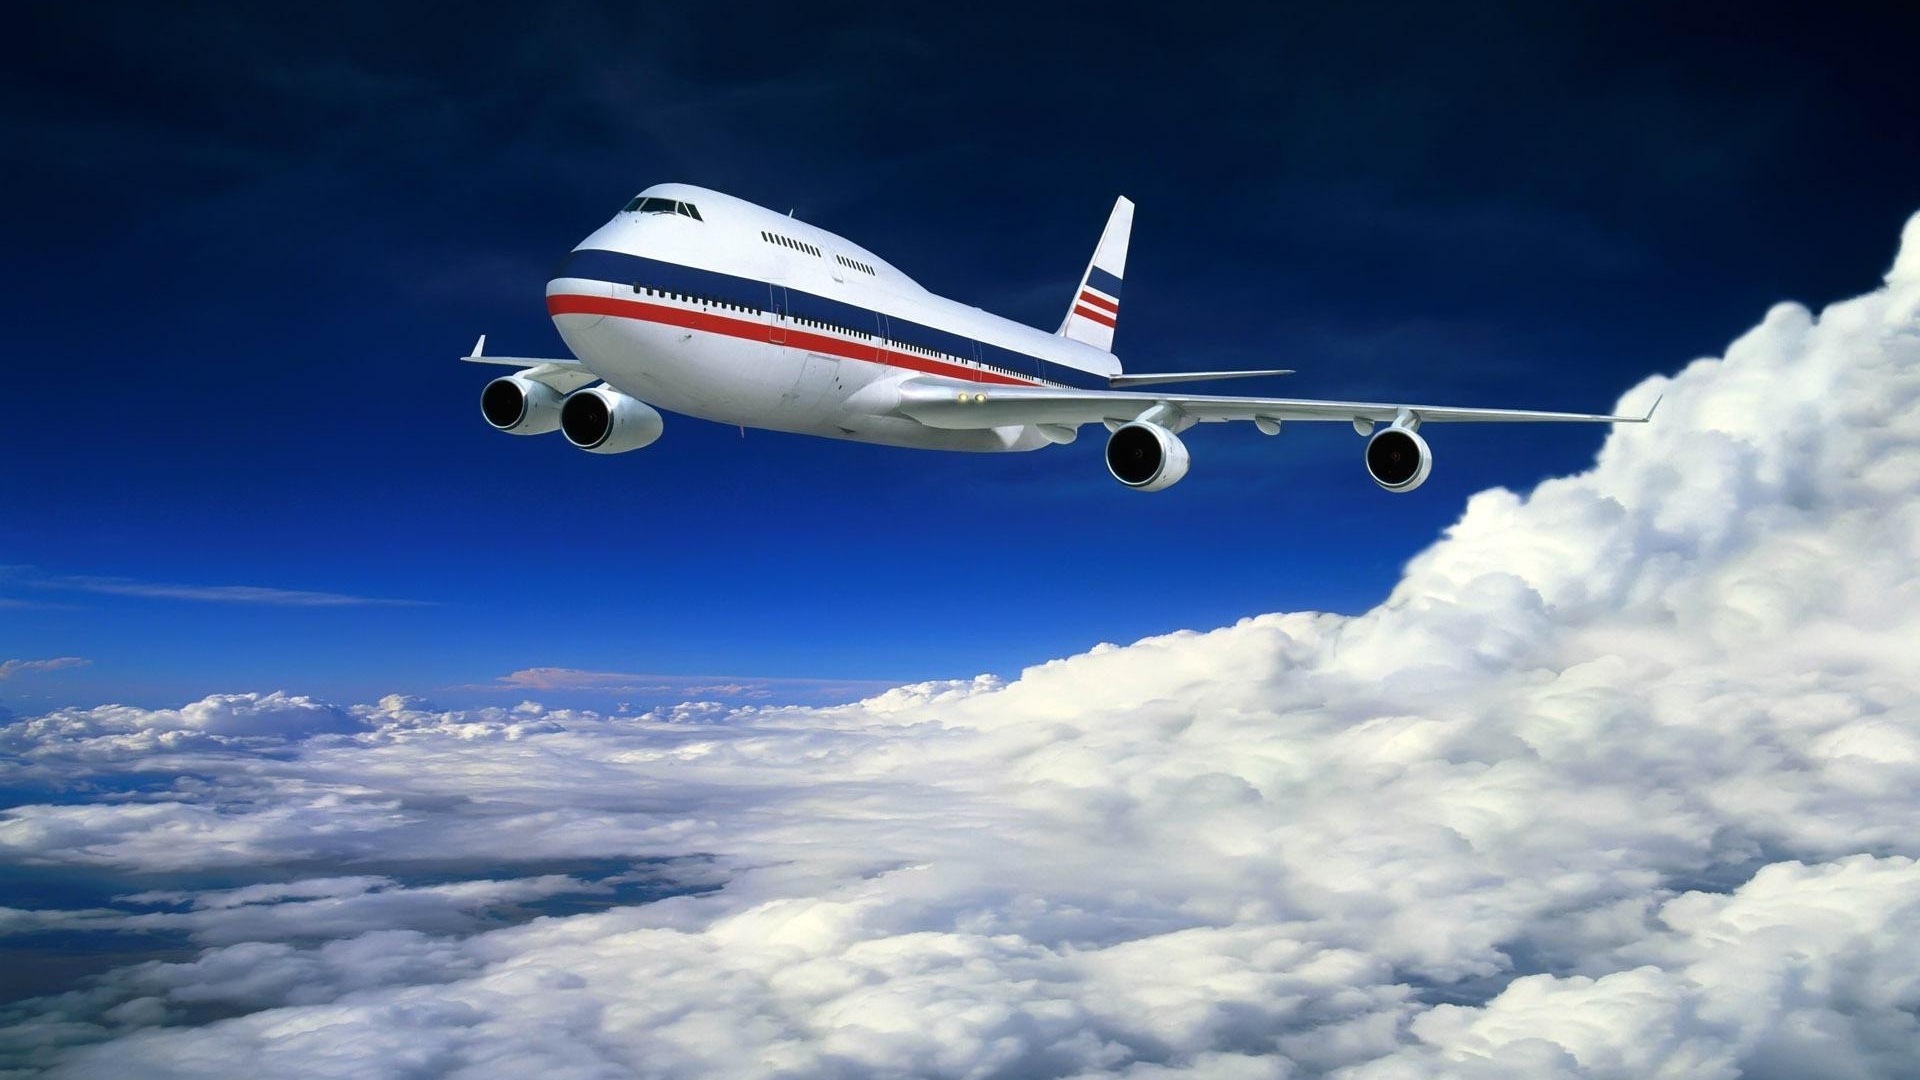 Boeing 747 airliner HD wallpapers #17 - 1920x1080